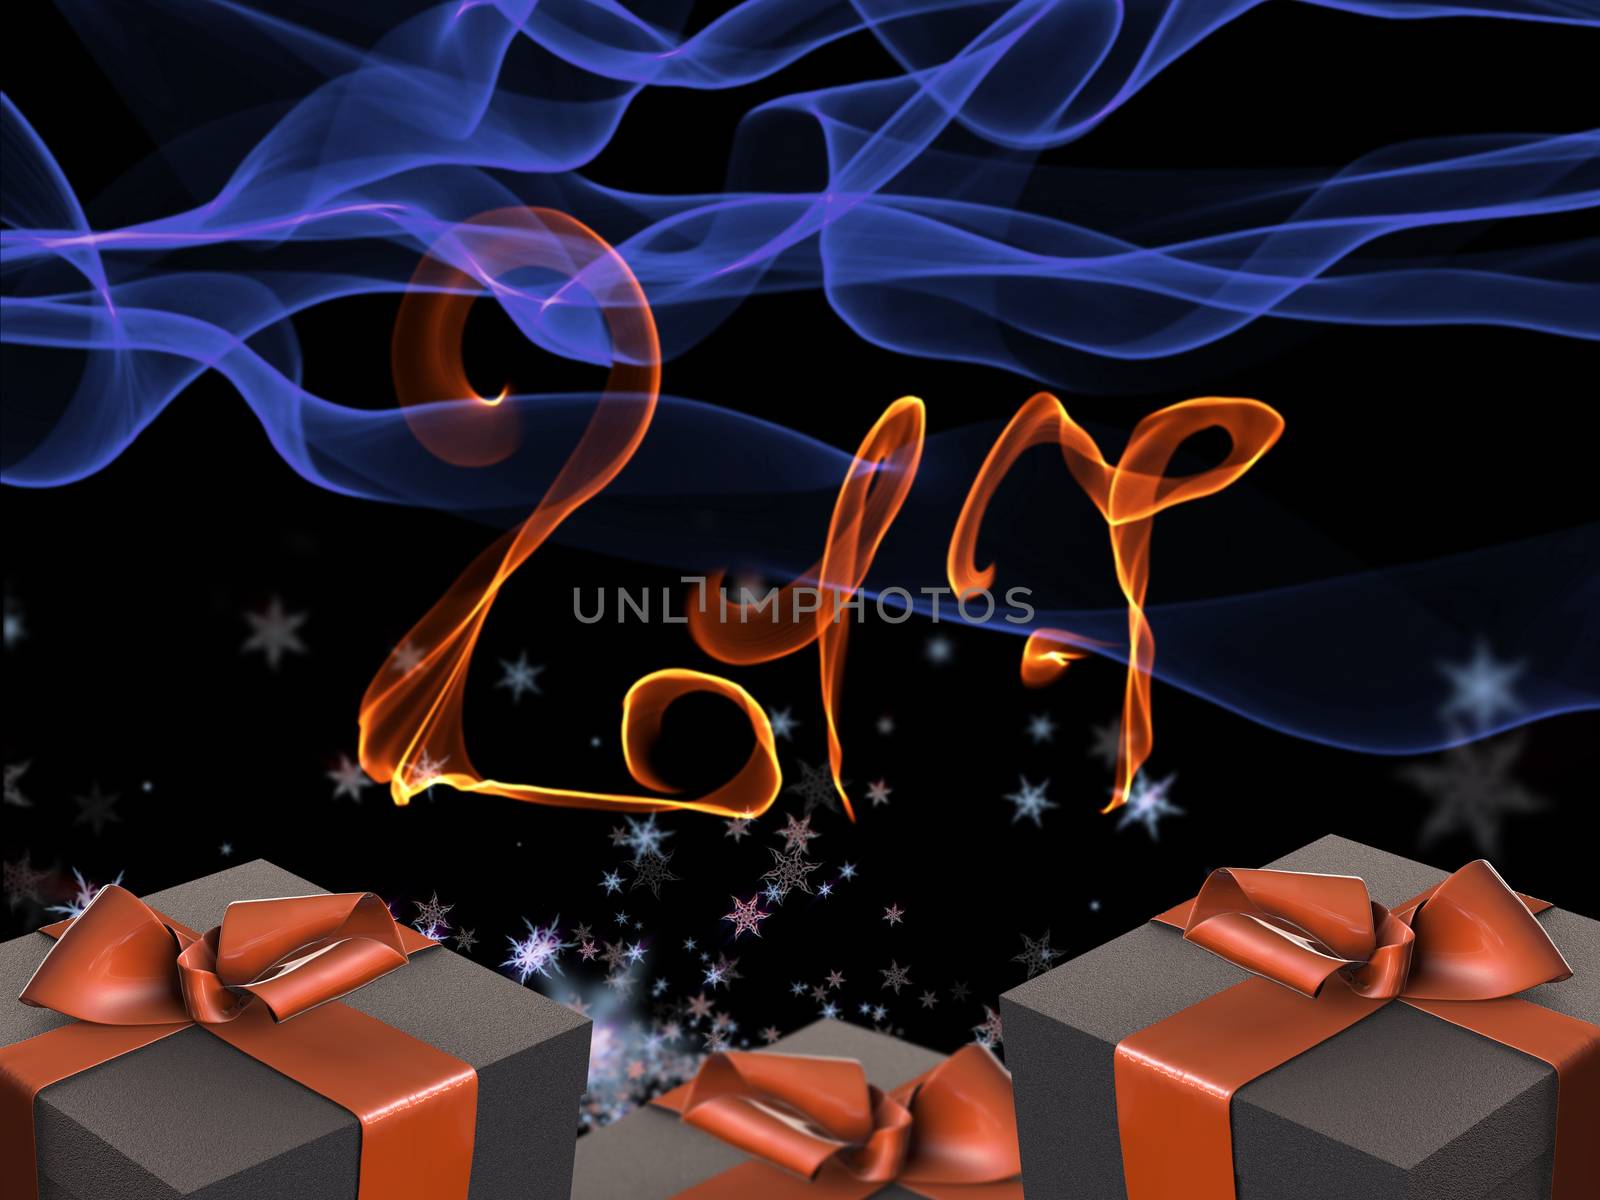 Colorful and striped boxes with gifts tied bows on dark abstract space background with 2017 letteing numbers written by fire. Happy new year 3d illustration by skrotov